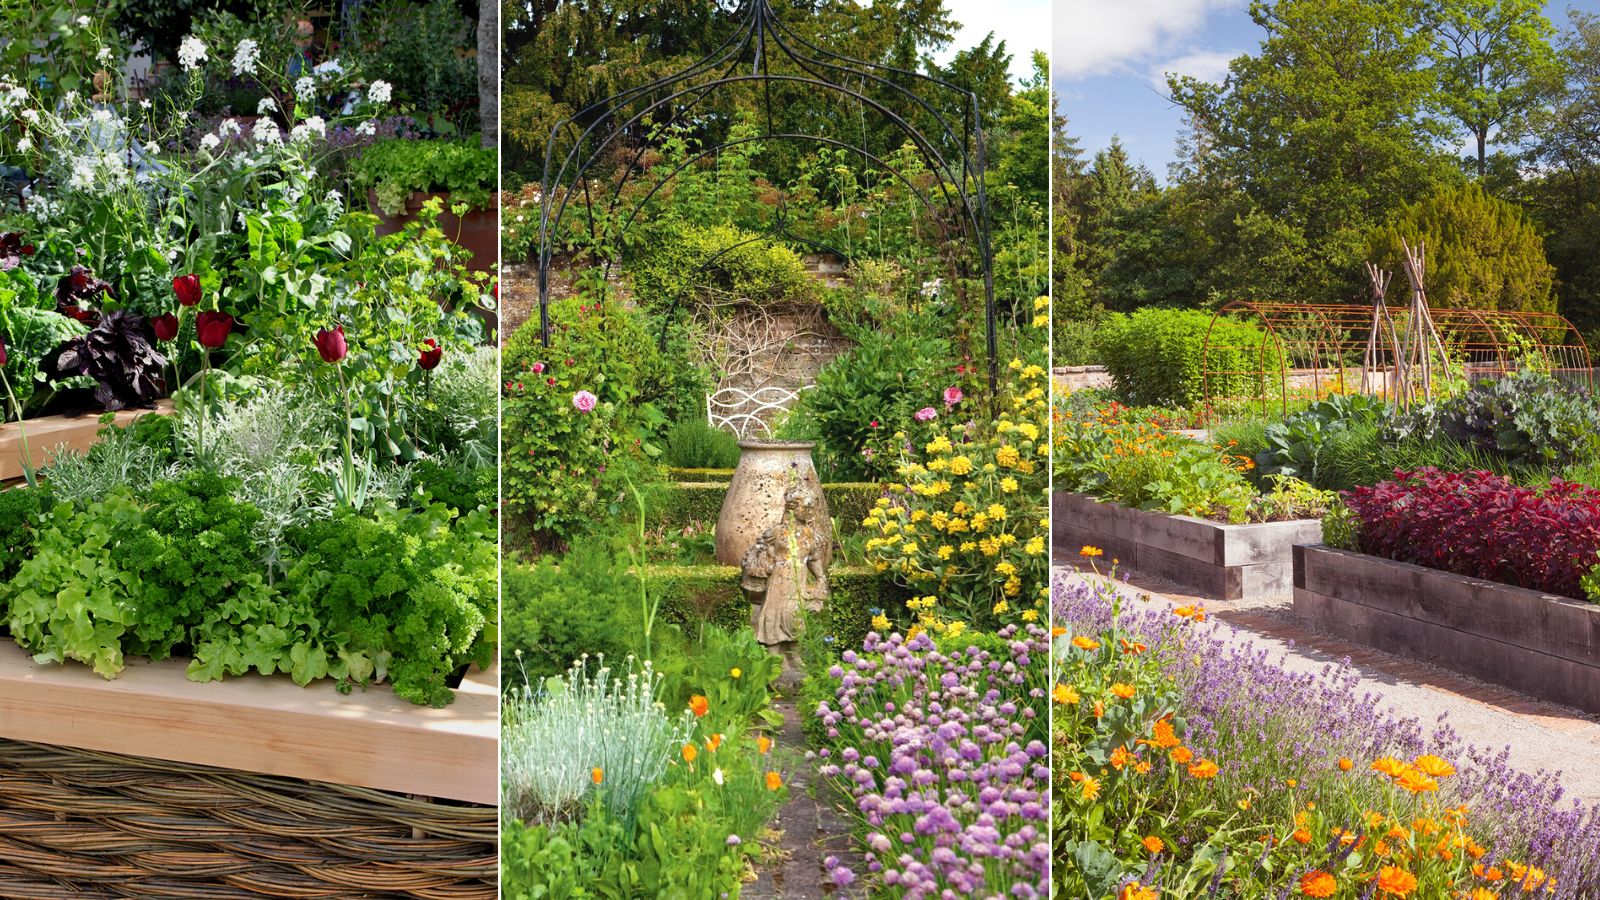 10 Edible Plants with Texture, Color and Fragrance in the Garden